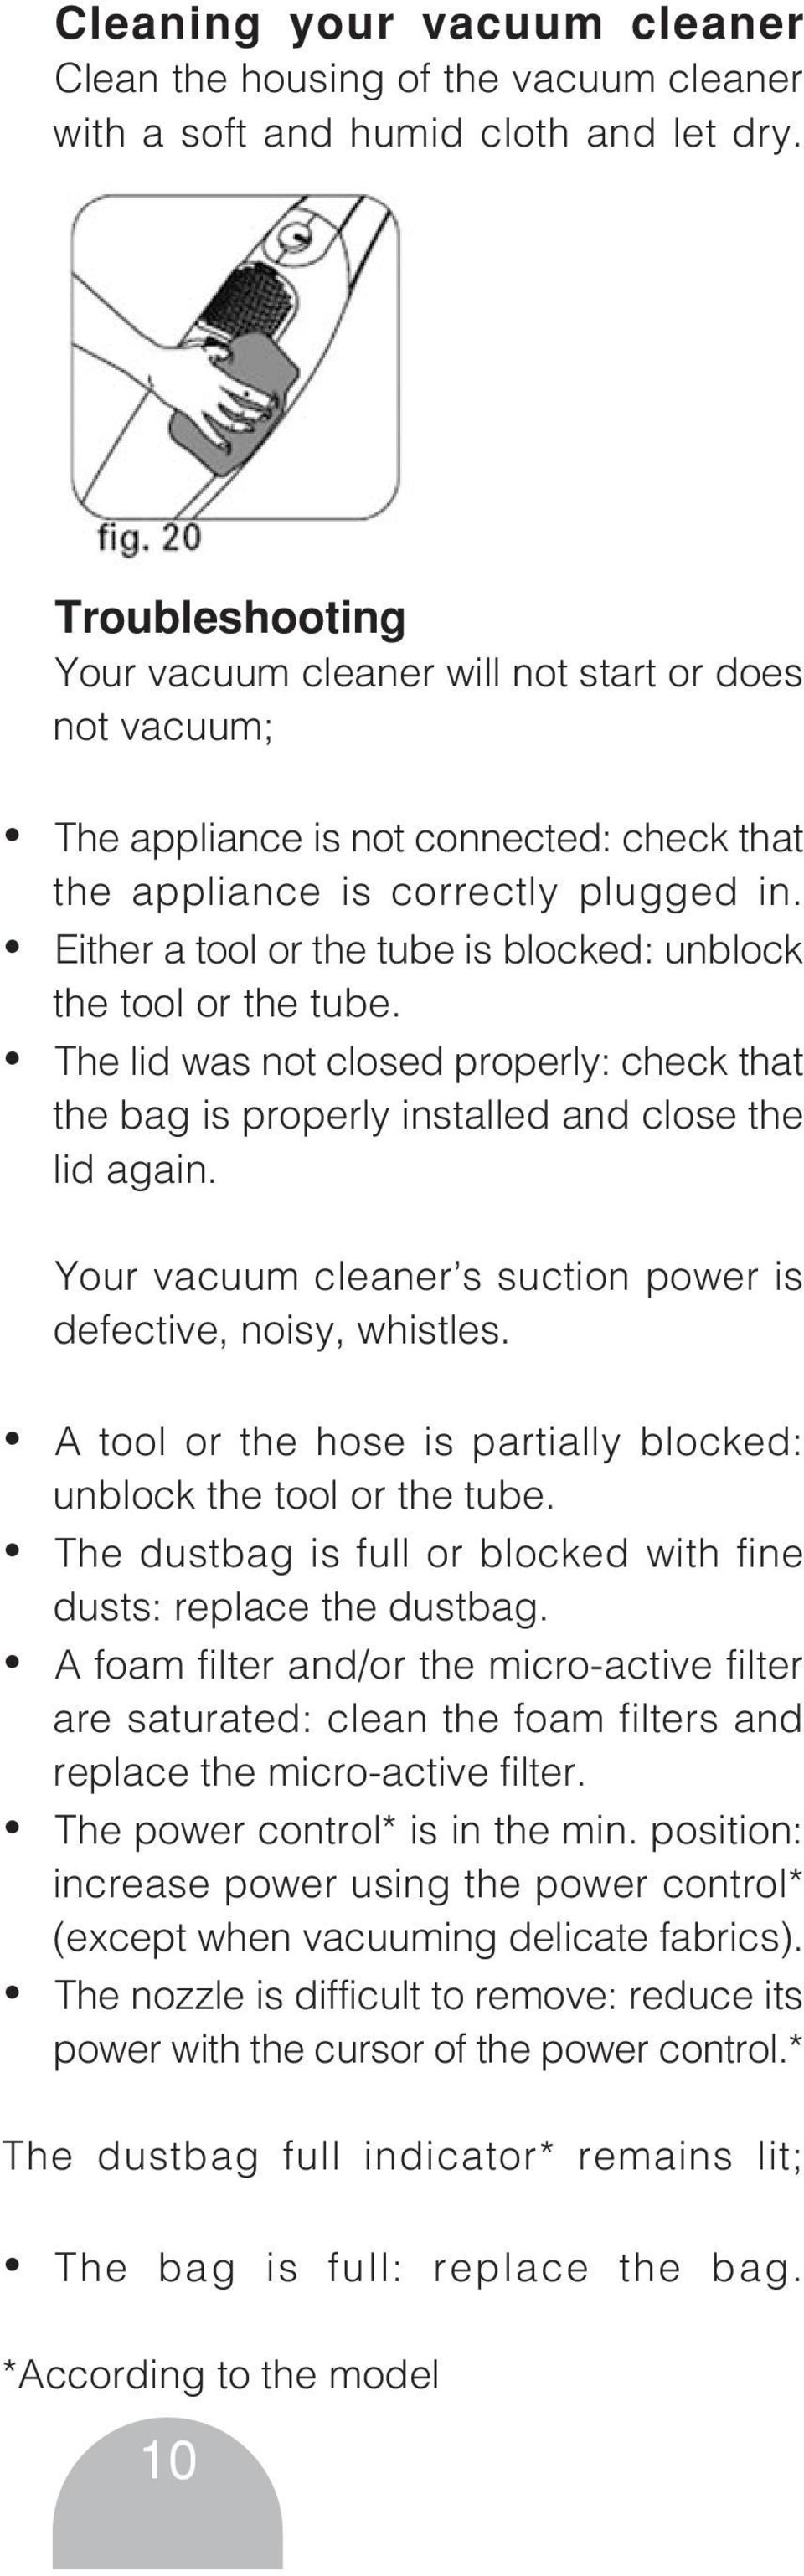 Either a tool or the tube is blocked: unblock the tool or the tube. The lid was not closed properly: check that the bag is properly installed and close the lid again.